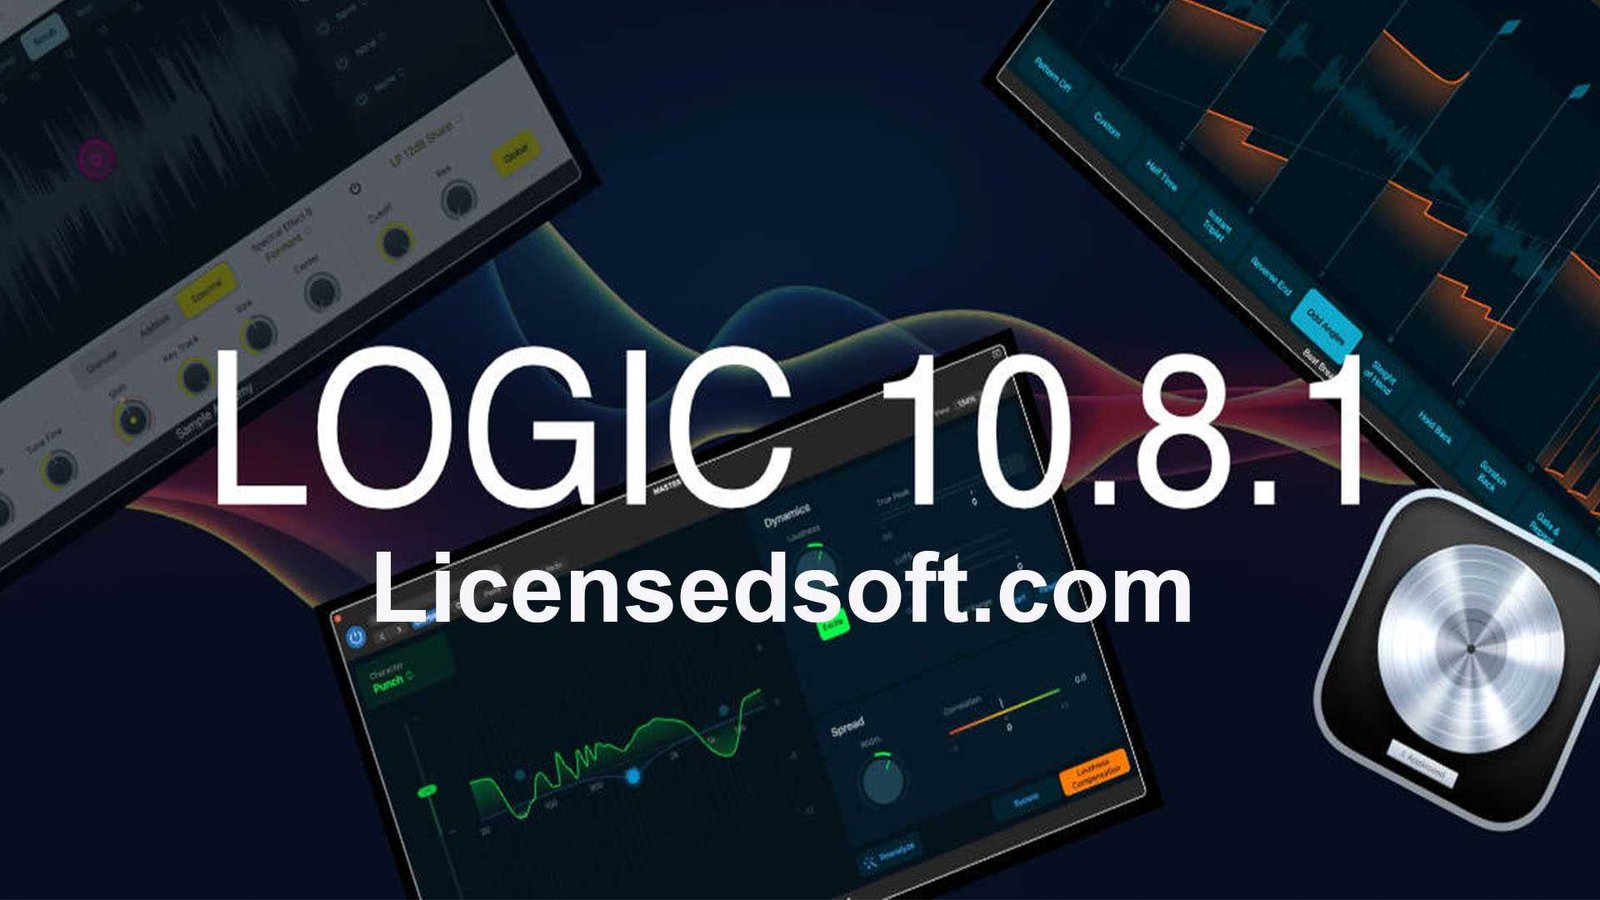 Apple Logic Pro X 10.8.1 For Mac Lifetime Premimum cover photo By licensedsoft.